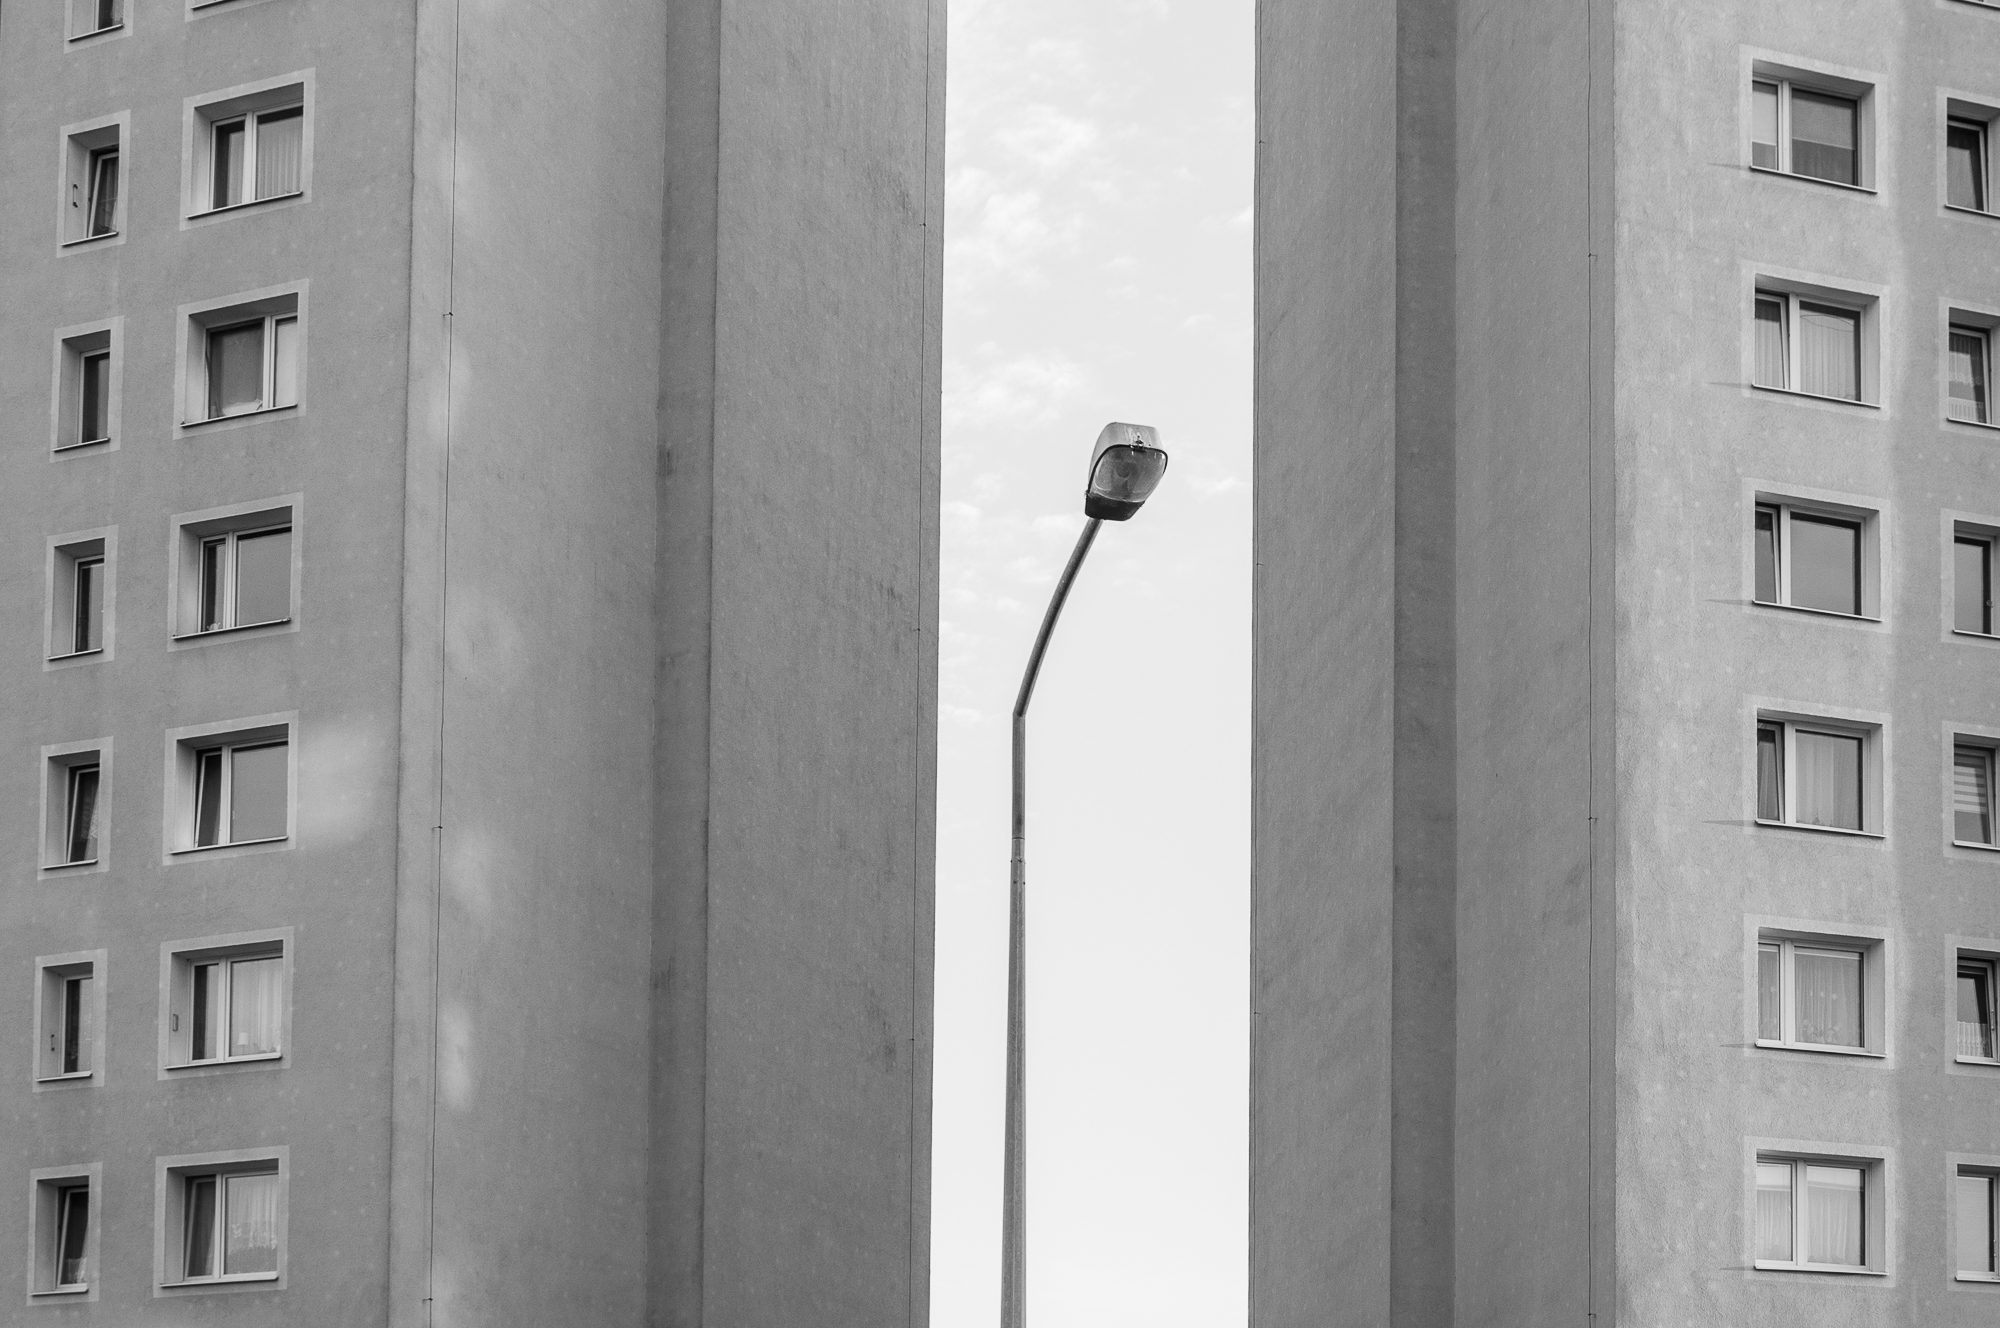 Adam Mazek Photography 2022. Warsaw Street Photography. Post: "Humankind explores the Universe to get to know our homeland, planet Earth." Minimalism.